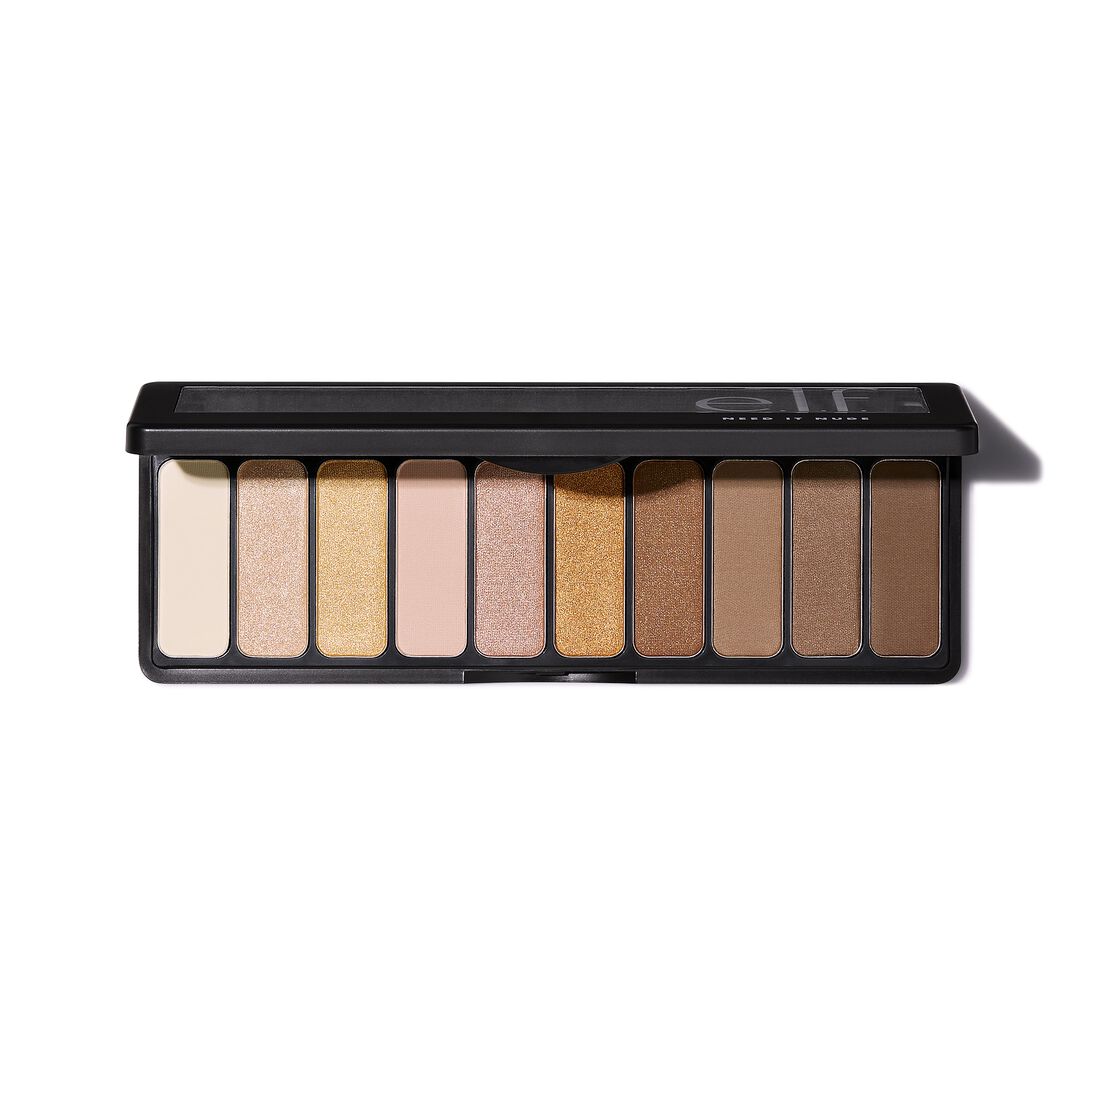 Nude Wanzhou palette in The Super